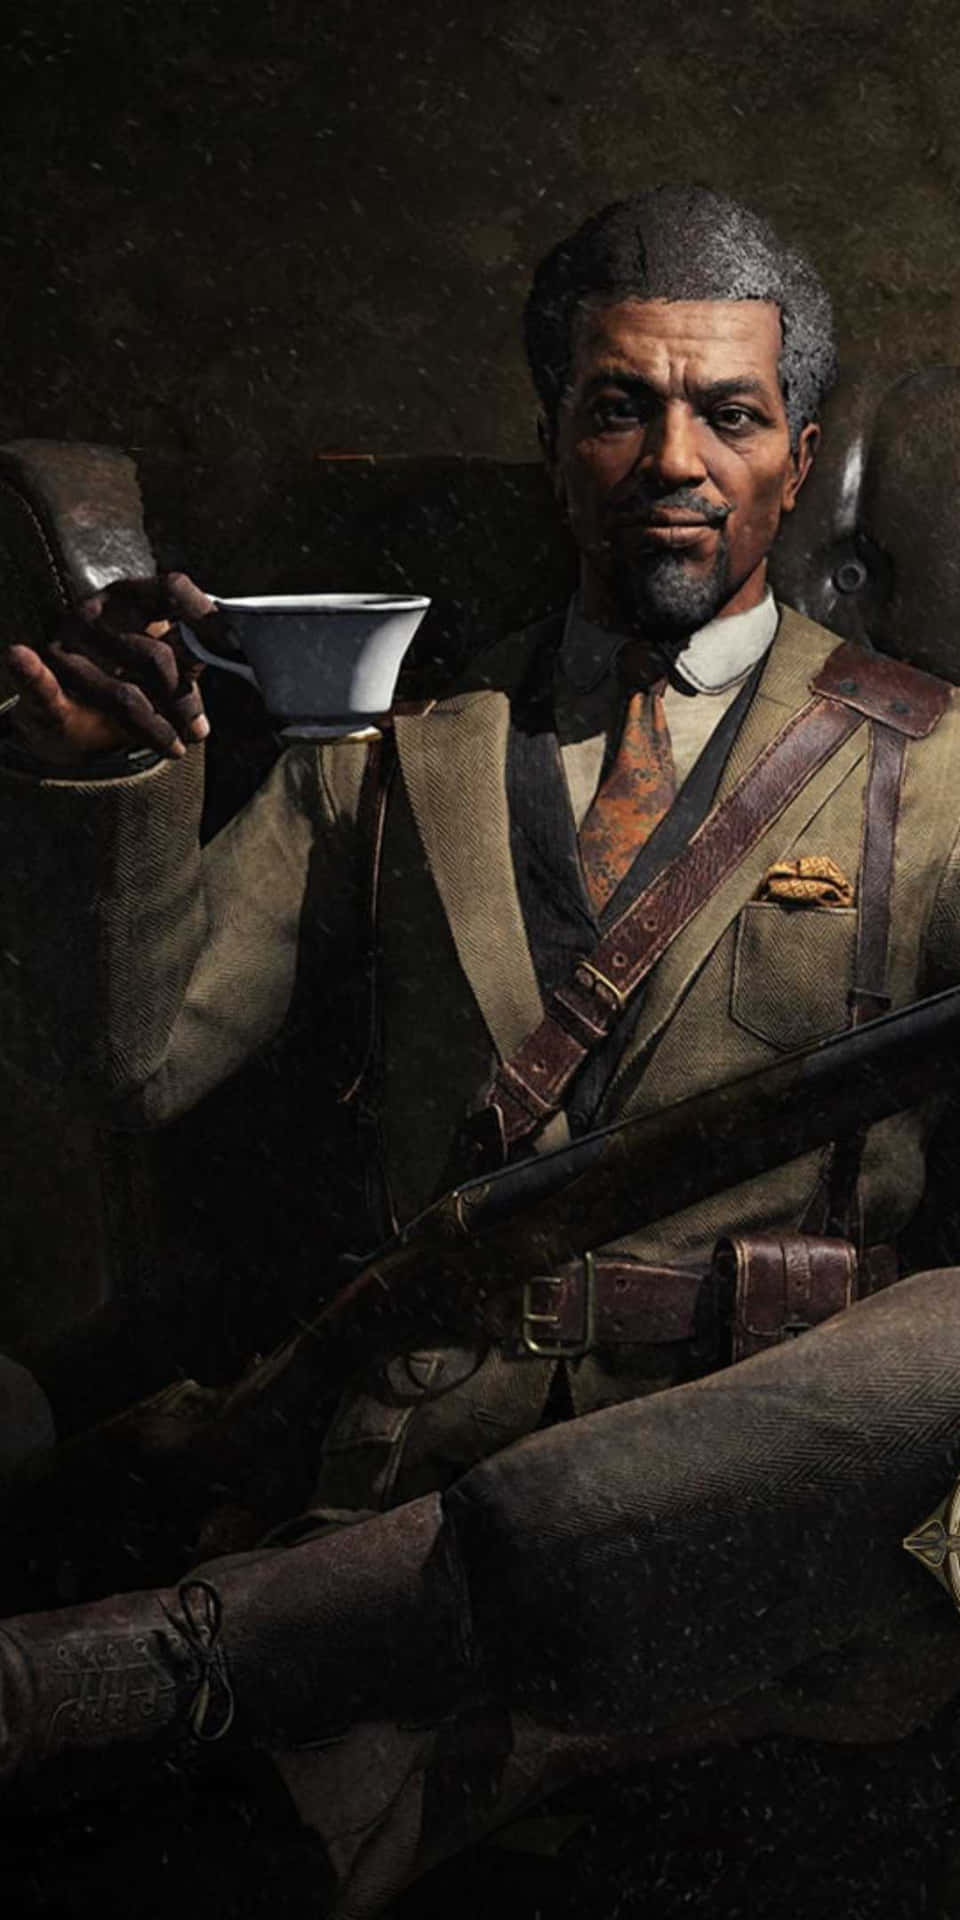 A Man In A Suit Holding A Knife